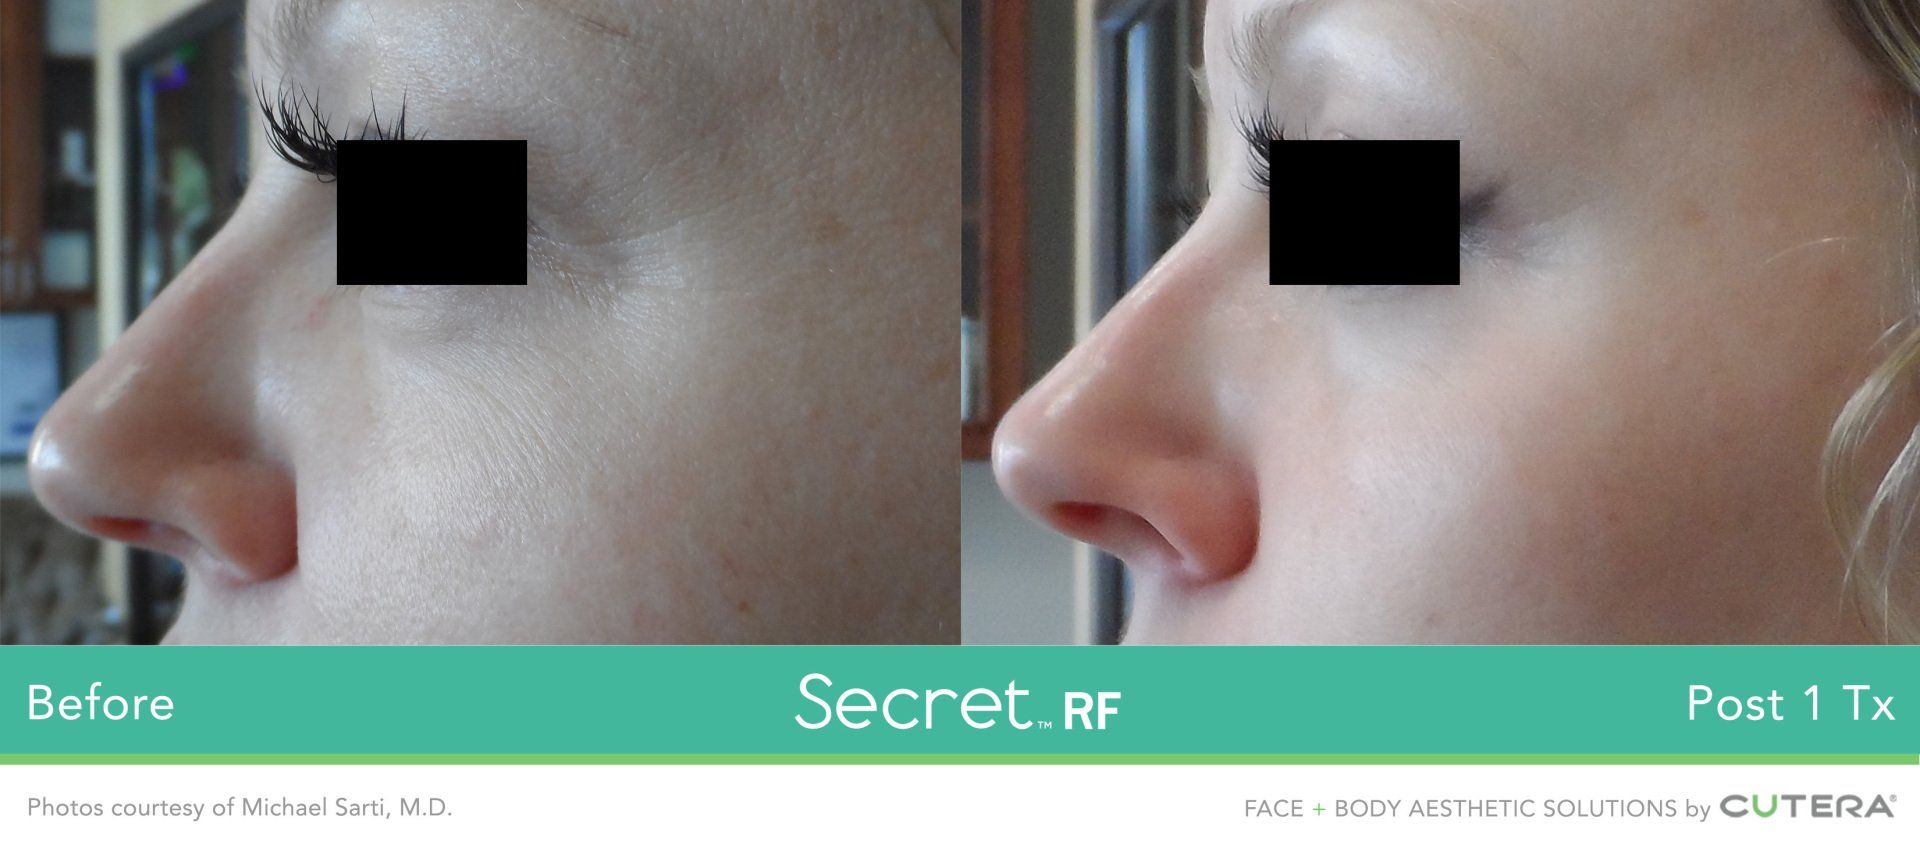 A before and after photo of a woman 's nose